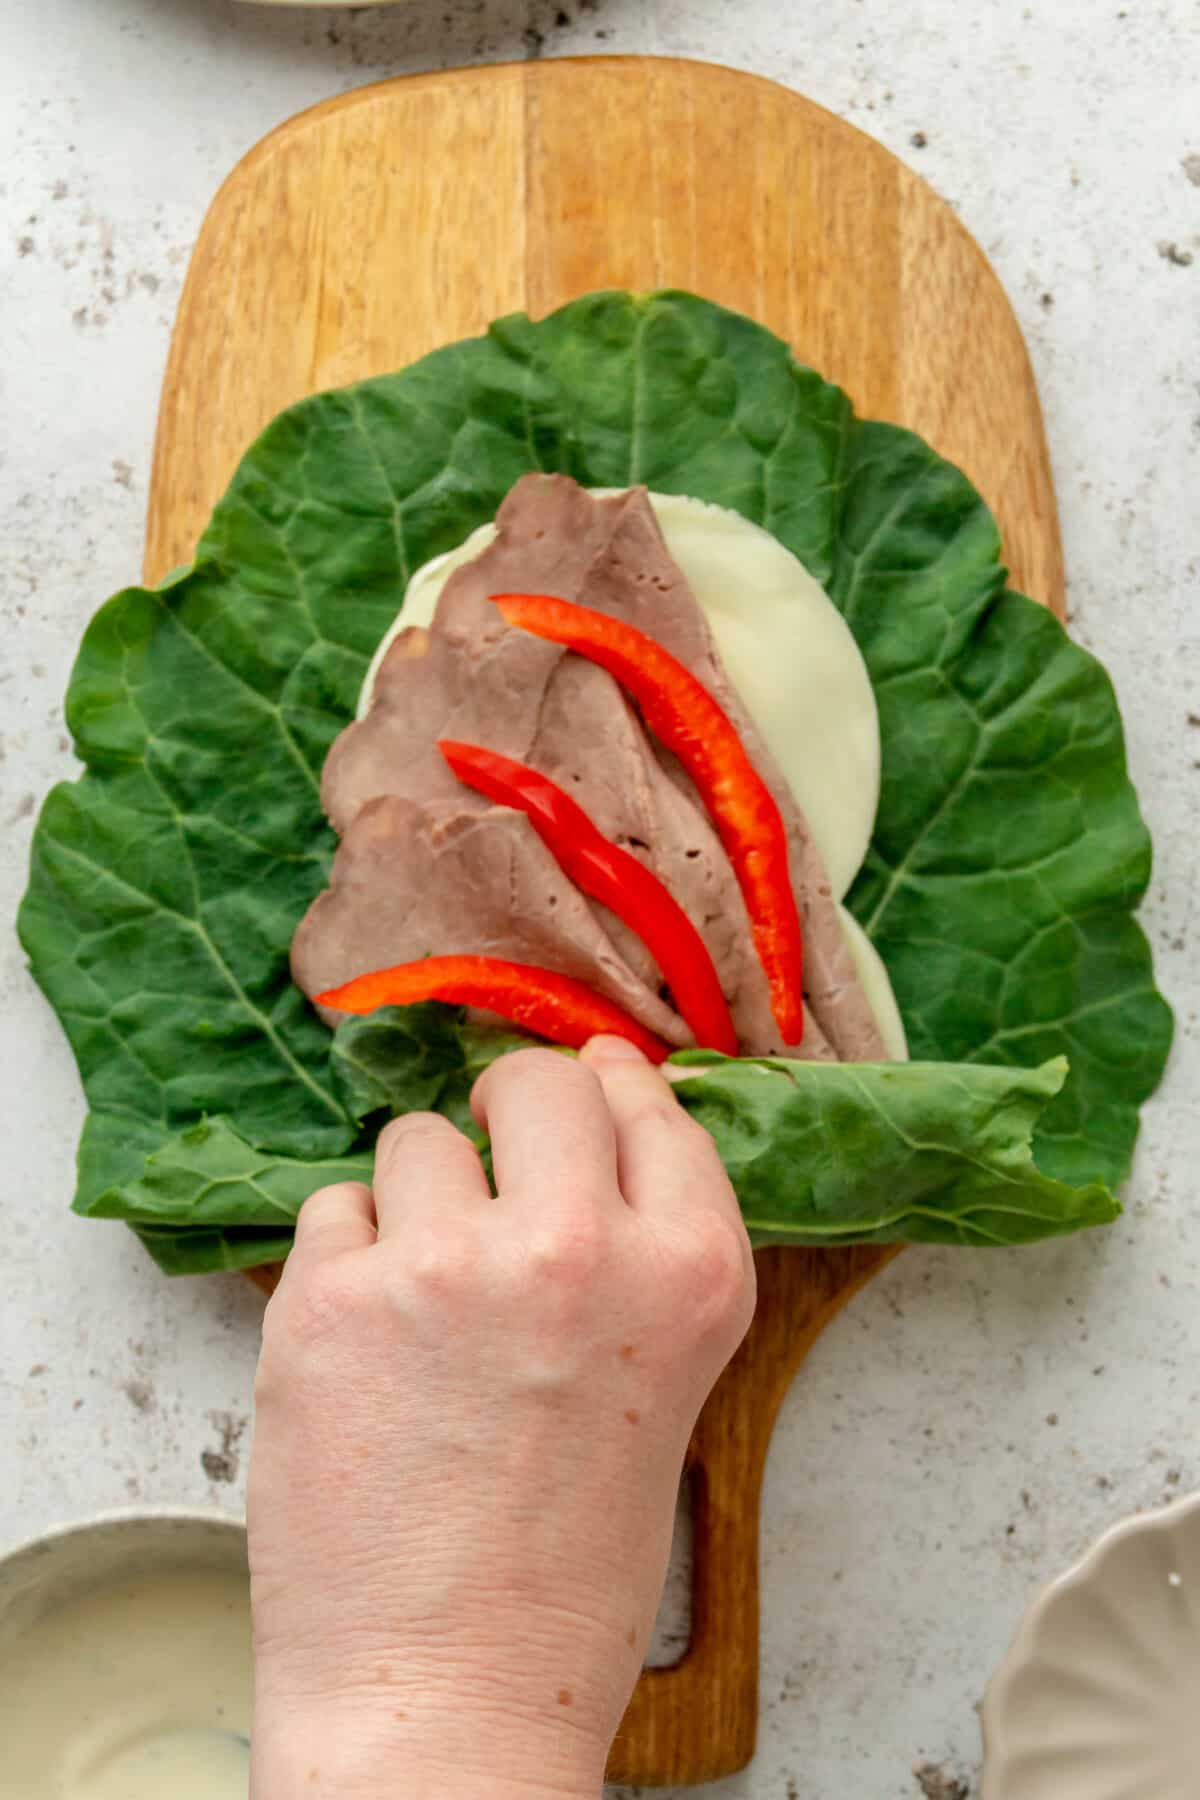 A roast beef wrap is rolled in a collard green leaf, sitting on a wooden board on a light grey surface.